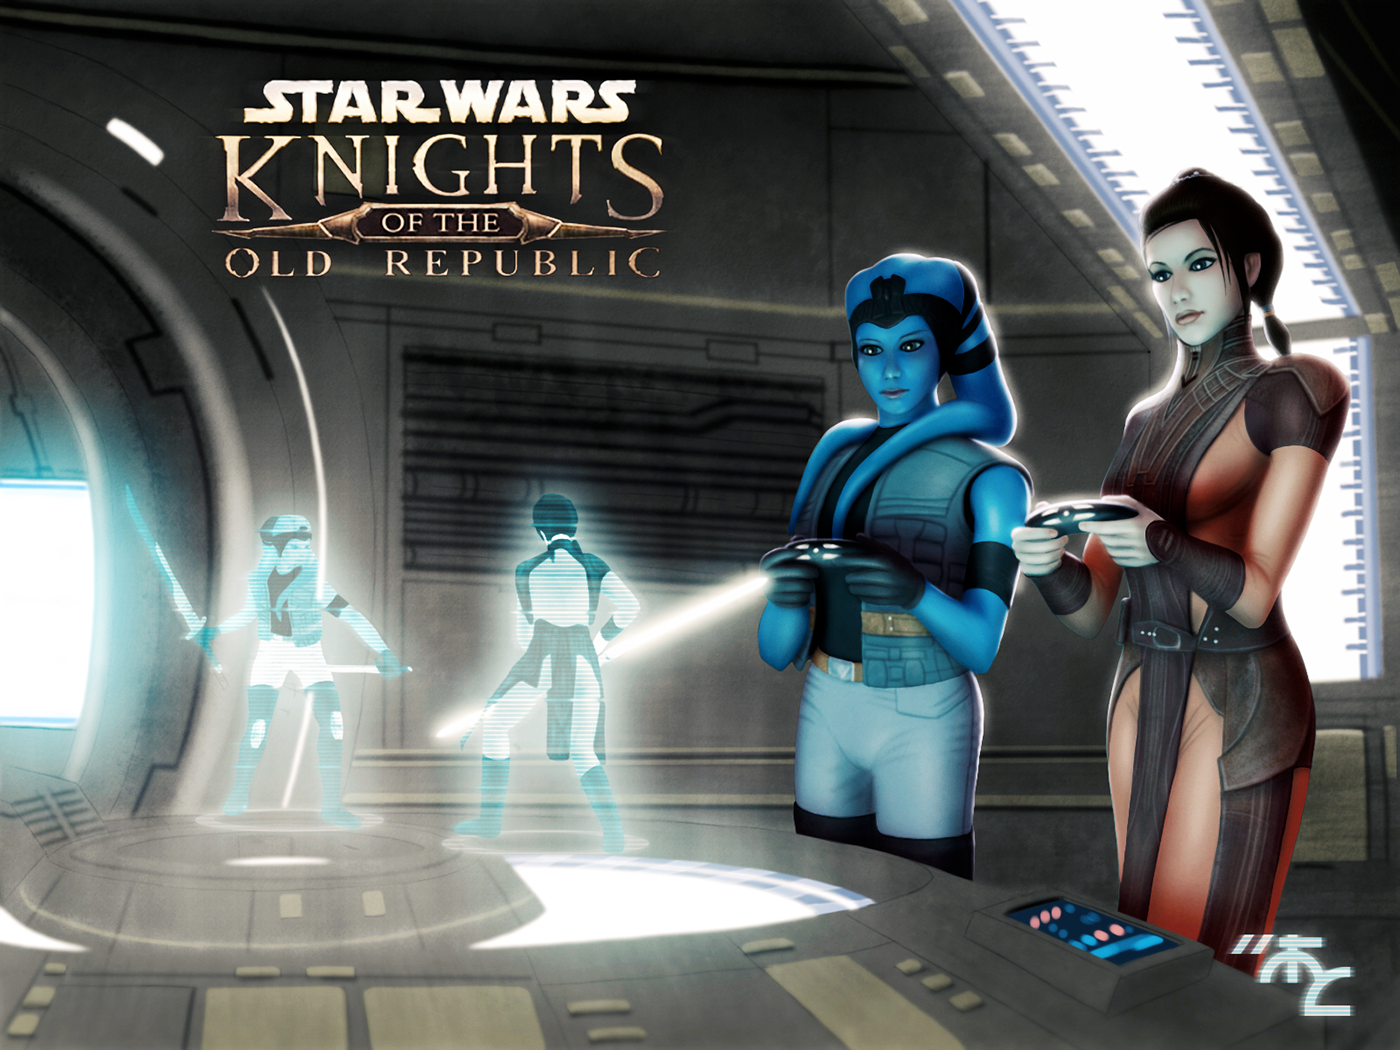 Star wars knight of the old republic 2 русификатор steam фото 92